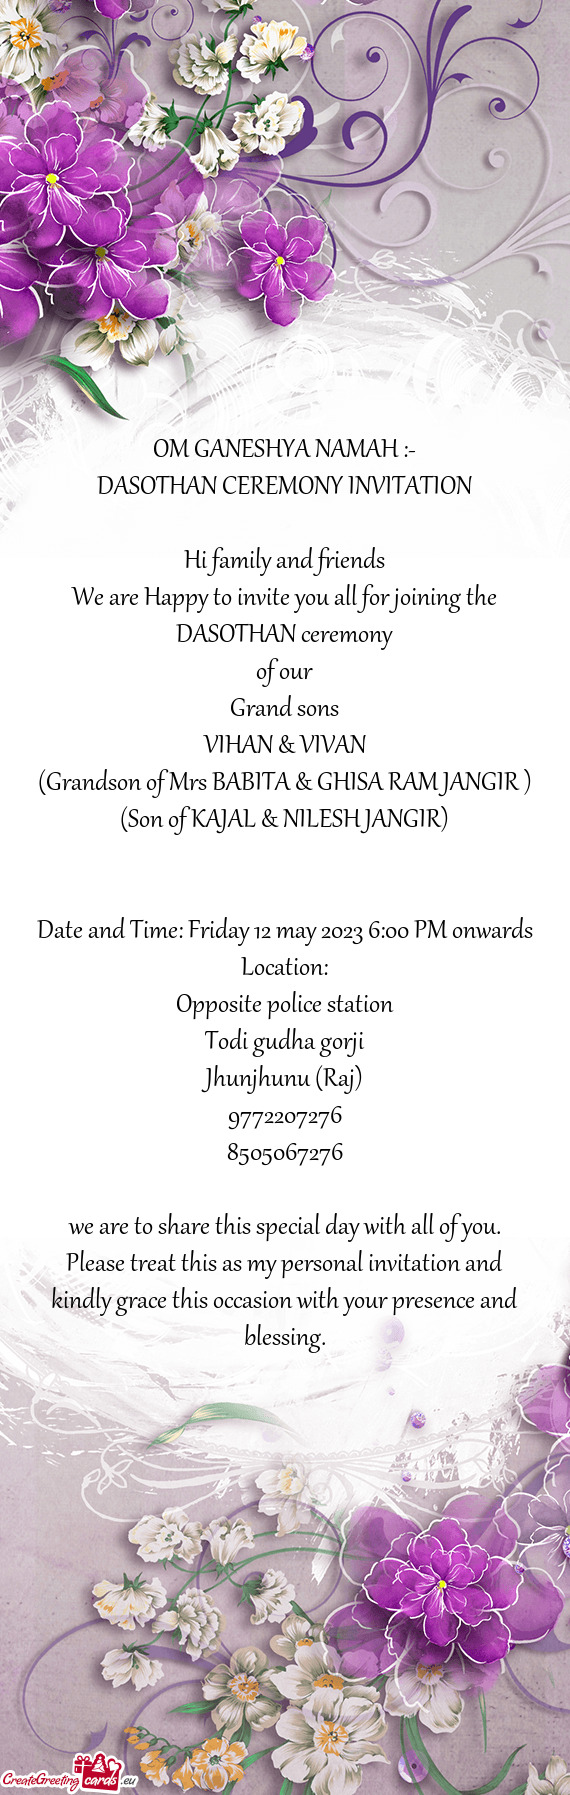 DASOTHAN CEREMONY INVITATION Hi family and friends We are Happy to invite you all for joining